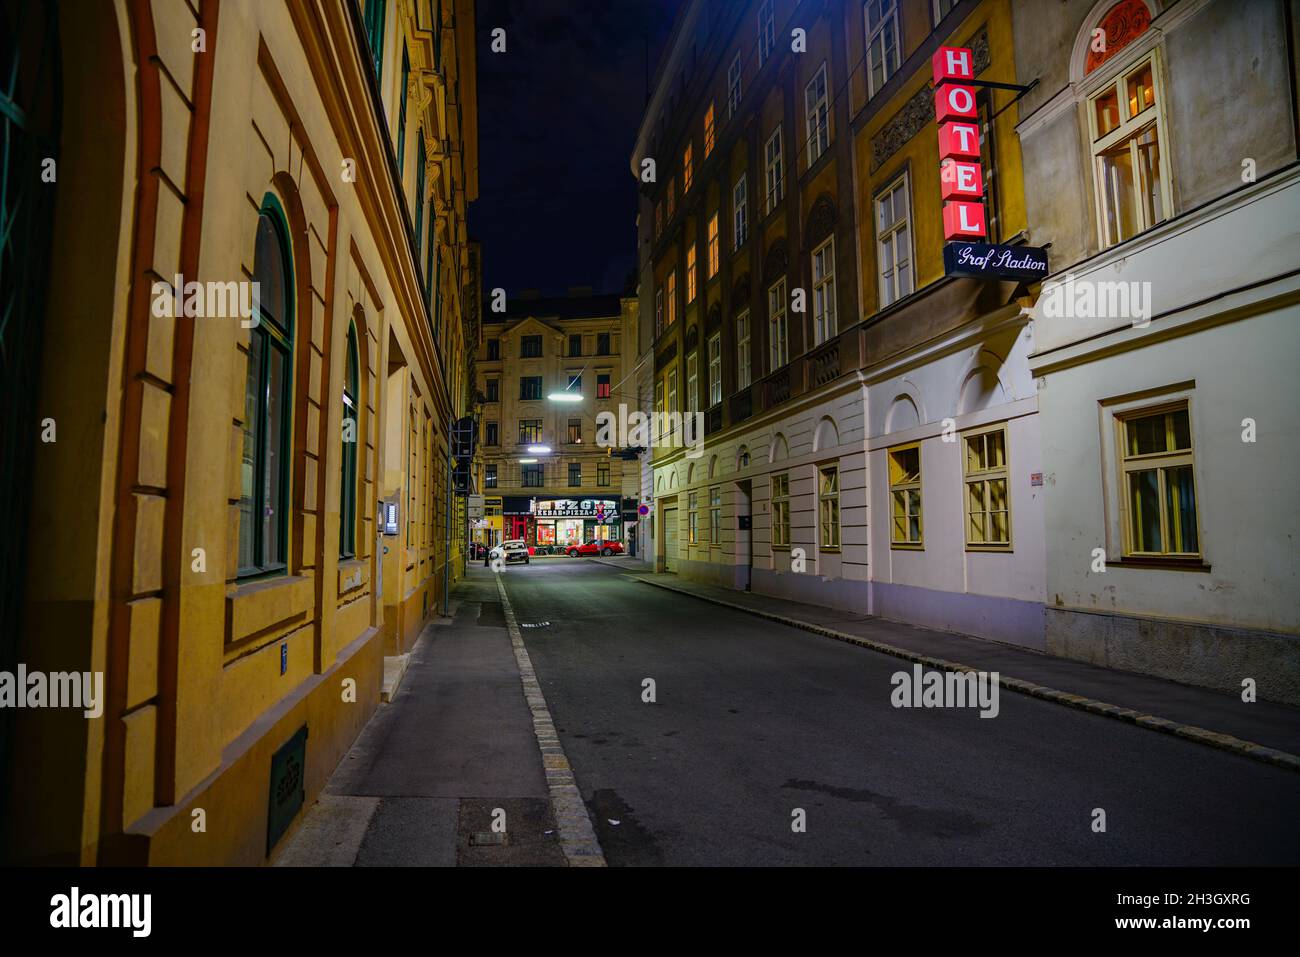 Vienna Austria - September 5 2017; view along Urban business district narrow street converging towards intersection with red illuminated hotel sign Stock Photo